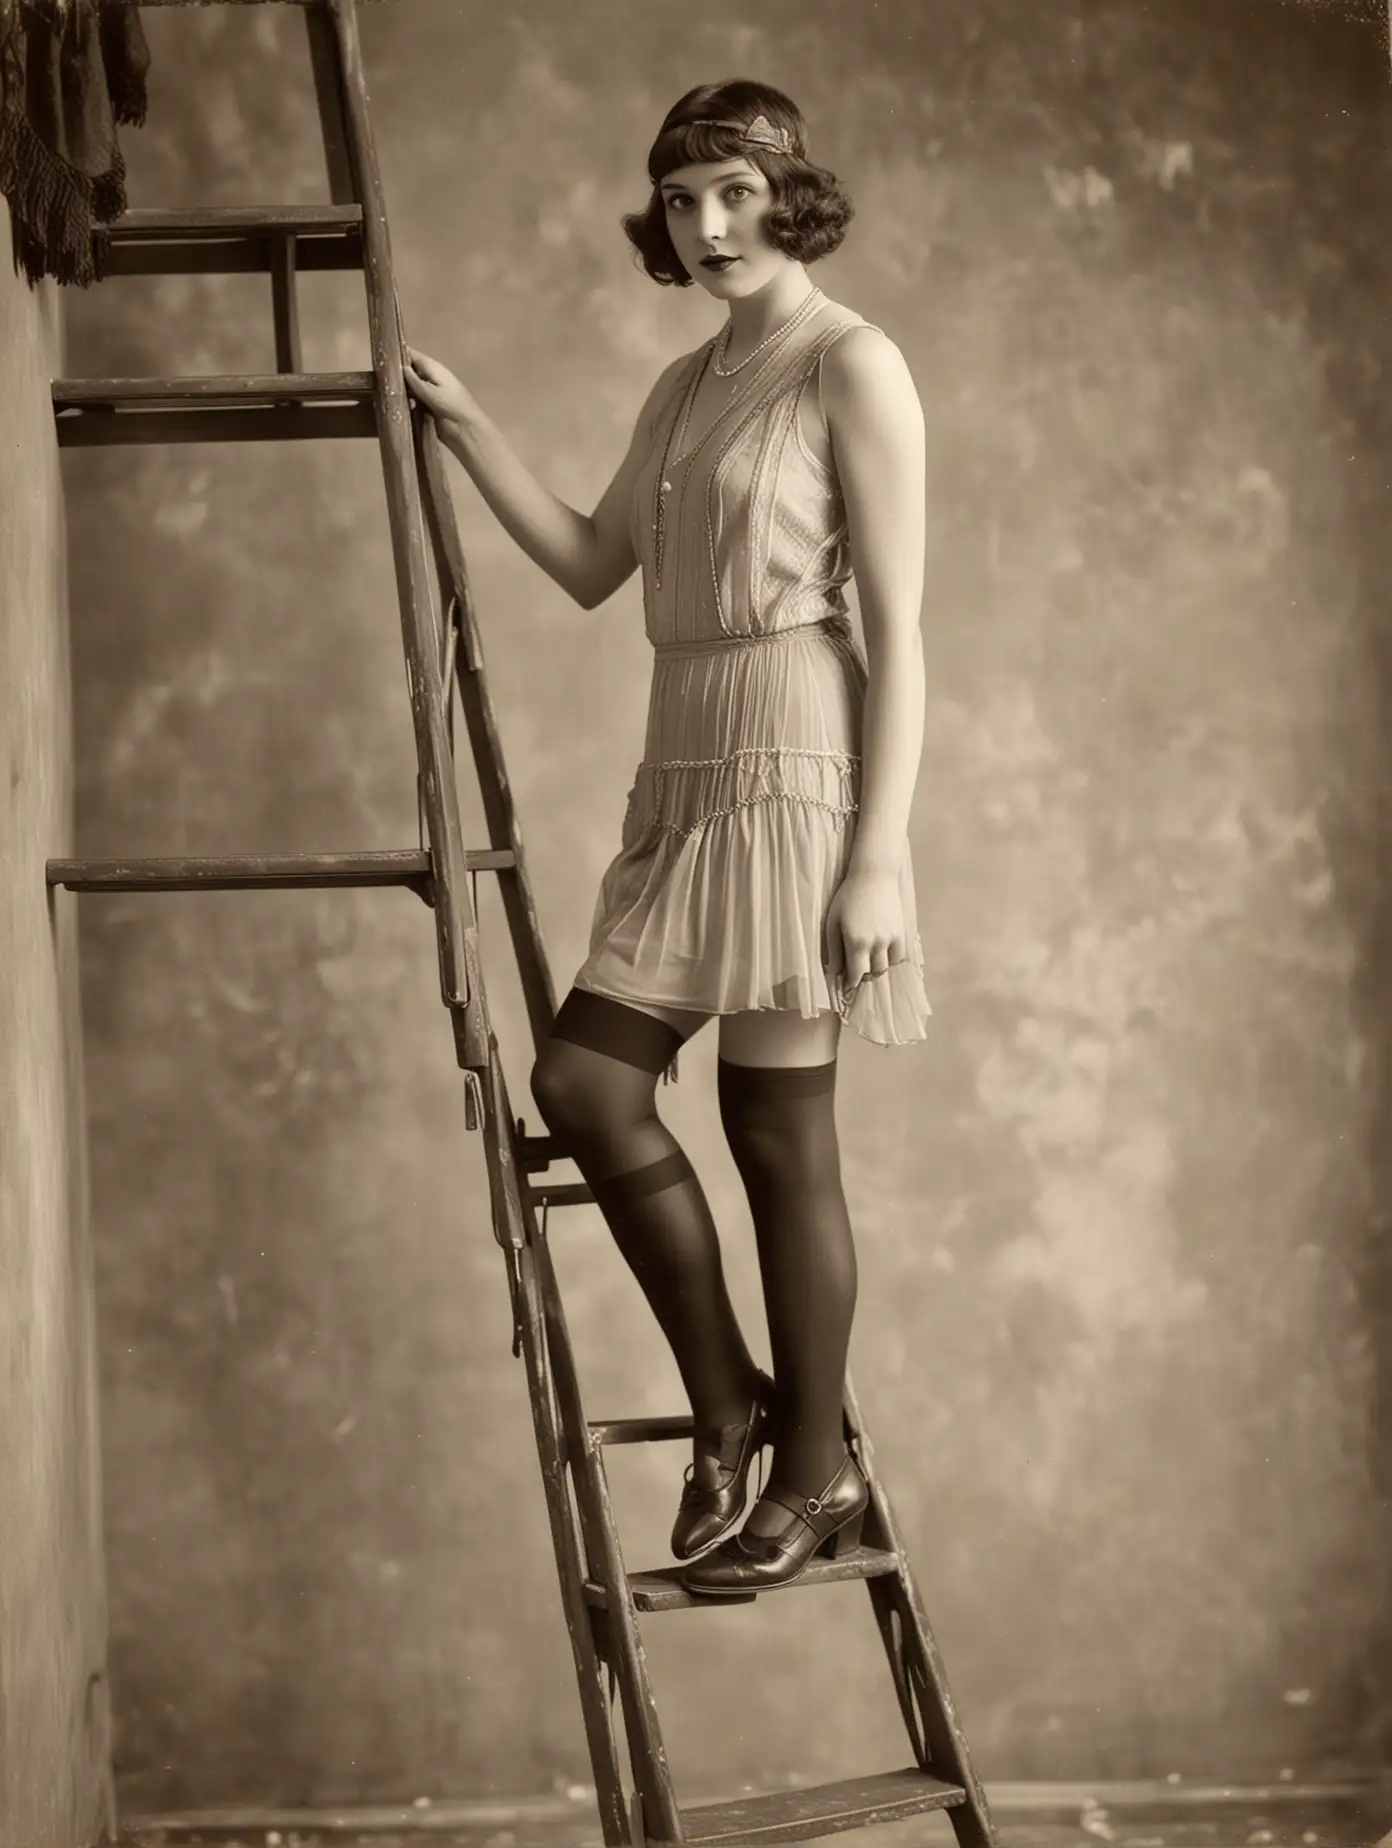 1920s photograph, looking up at a cute flapper girl, she is climbing a step-ladder, she is dressed in nylon stockings and a short shift, sensual, vintage, patina slightly worn